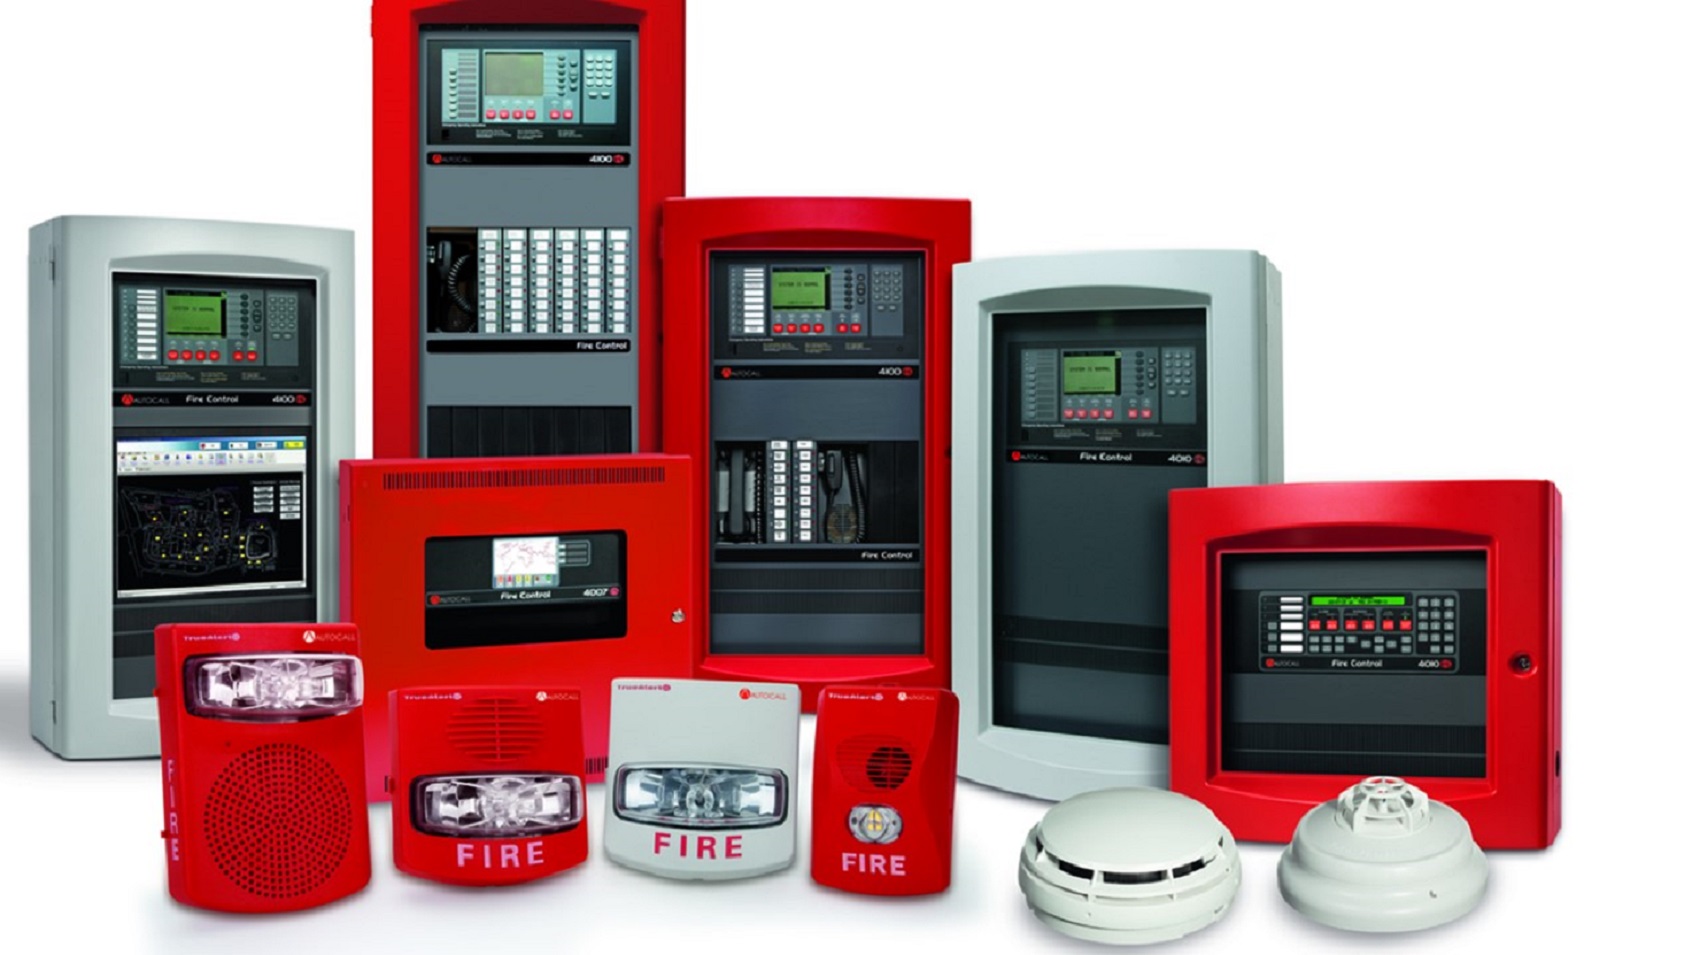 How to check Fire safety at your workplace?